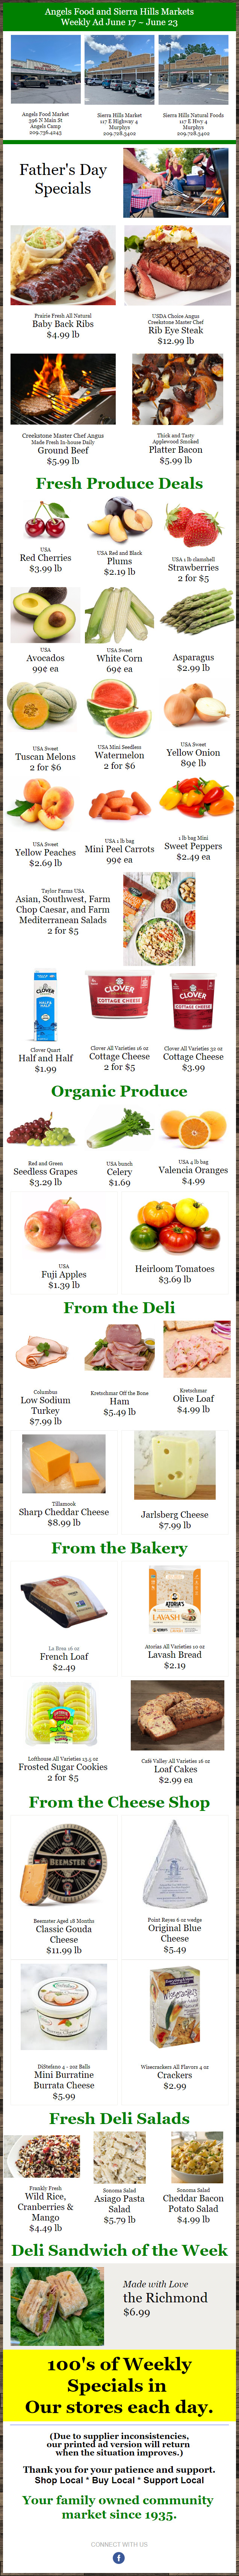 Angels Food and Sierra Hills Markets Weekly Ad & Specials Through June 23rd